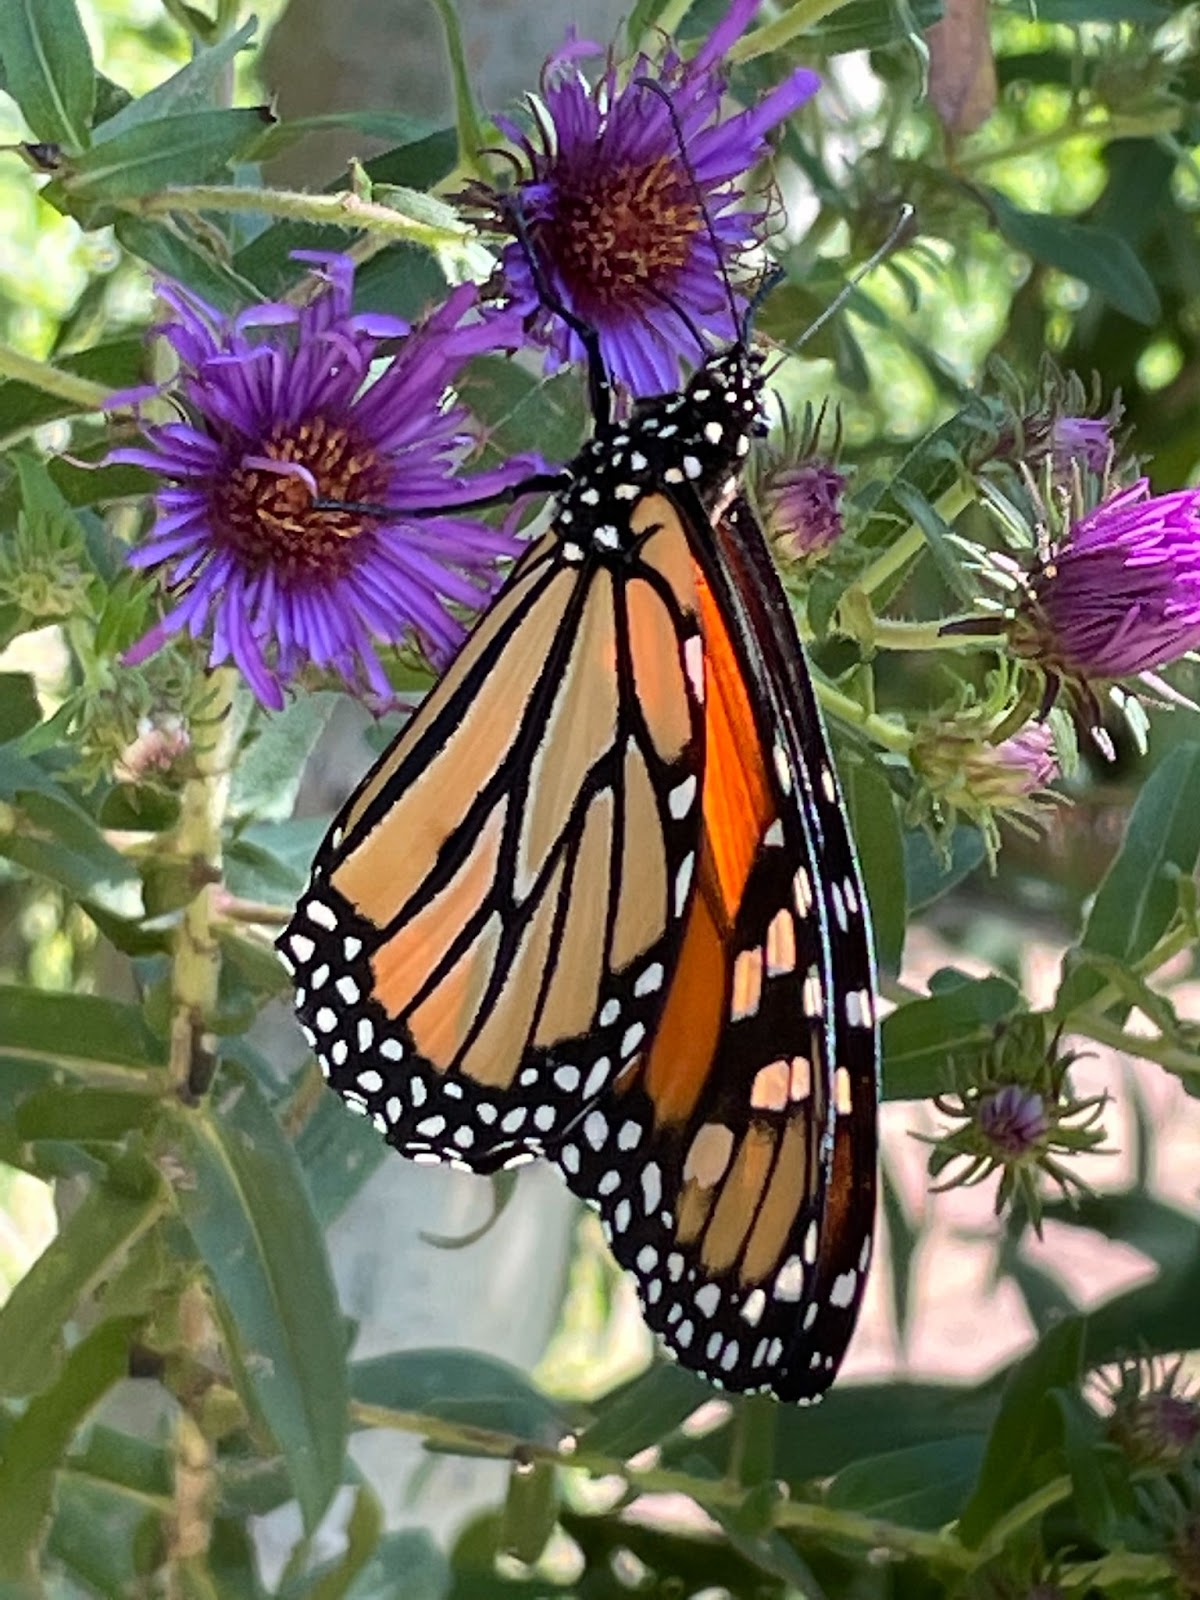 In Defense of The Monarch Butterfly
